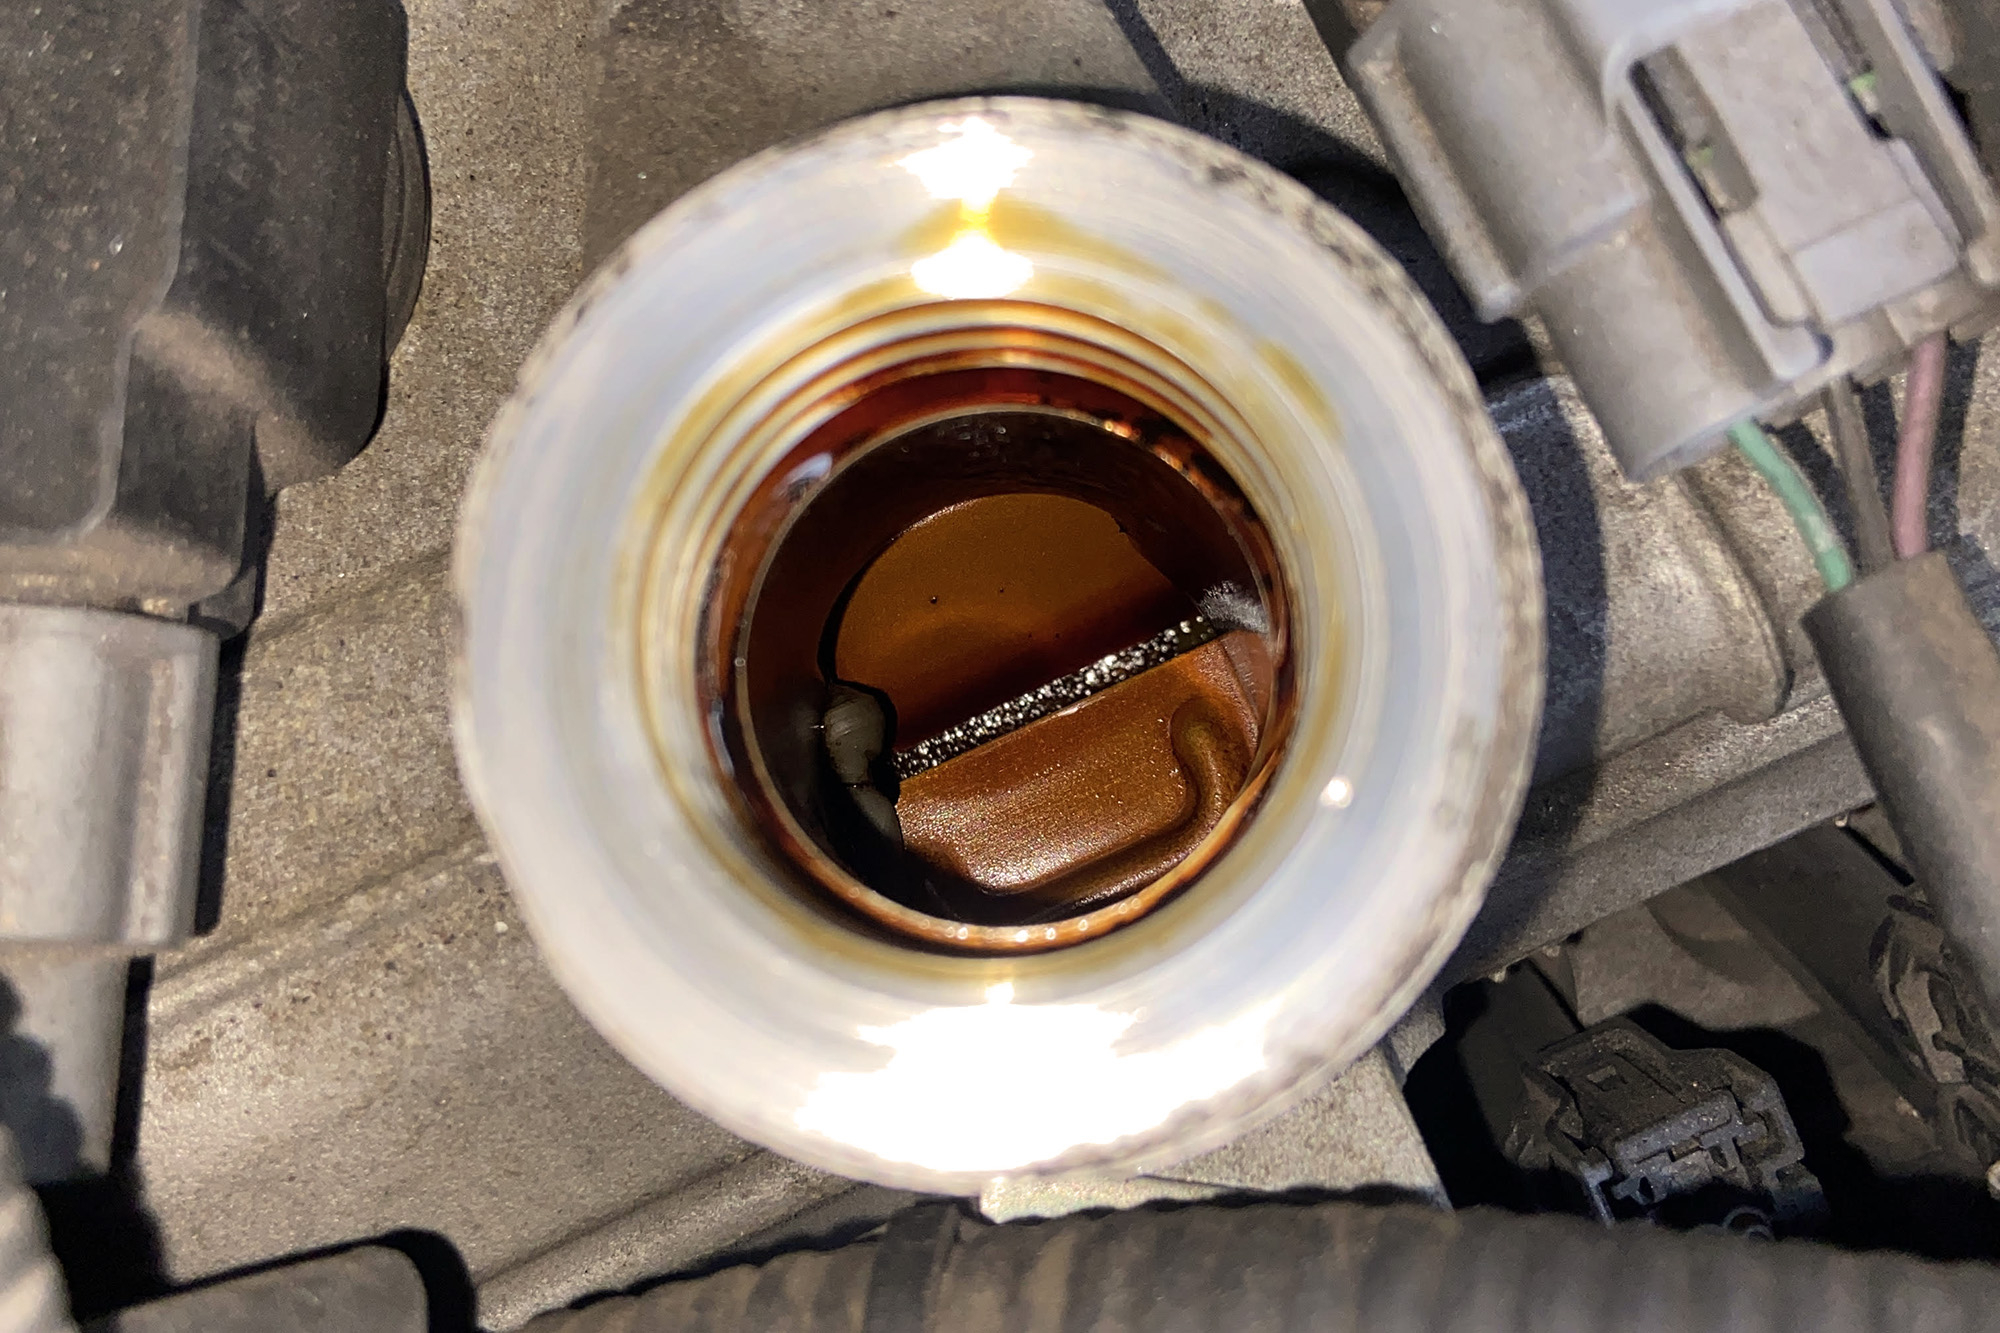 Preventing Oil Crust Build-Up In Engines